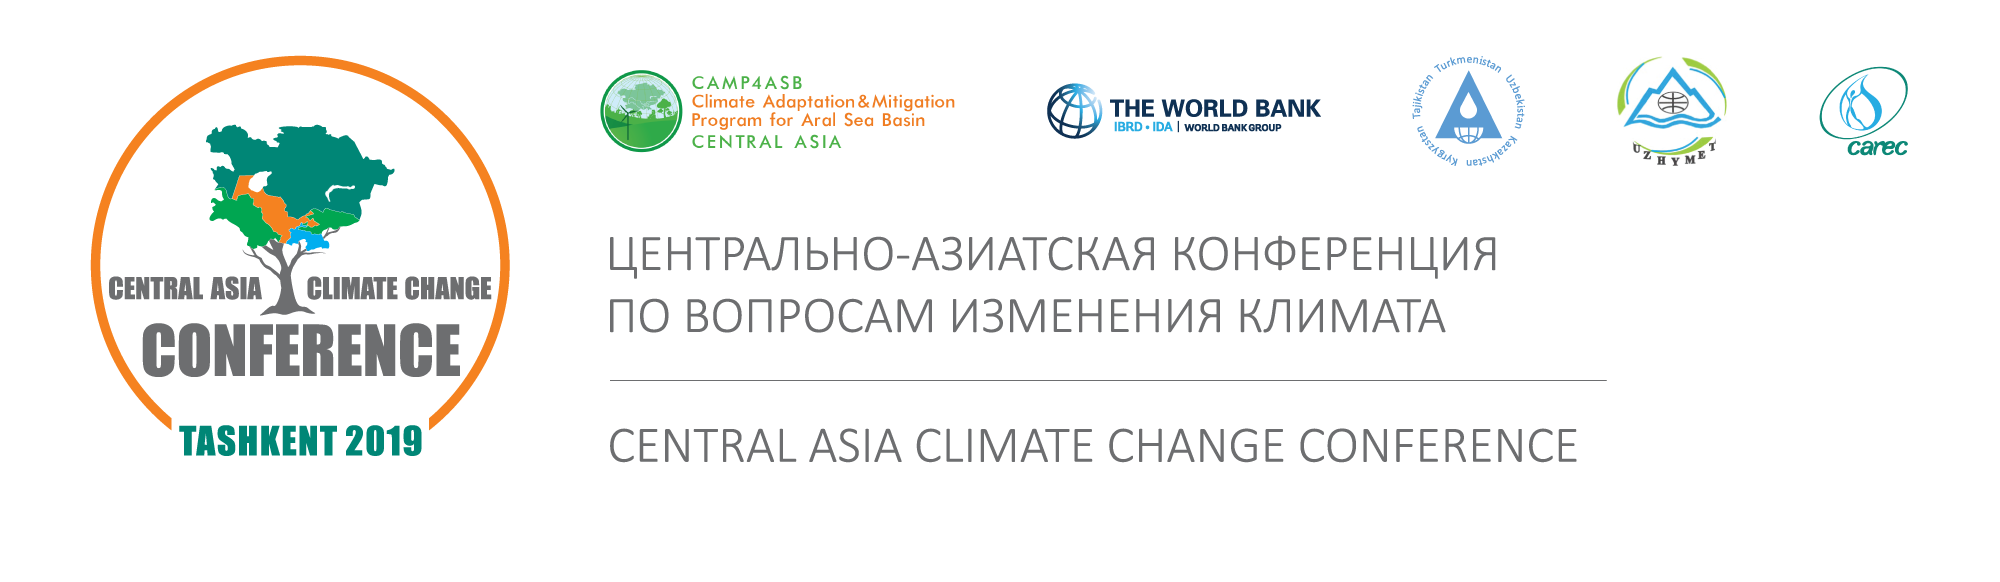 Tashkent will host Central Asia Climate Change Conference